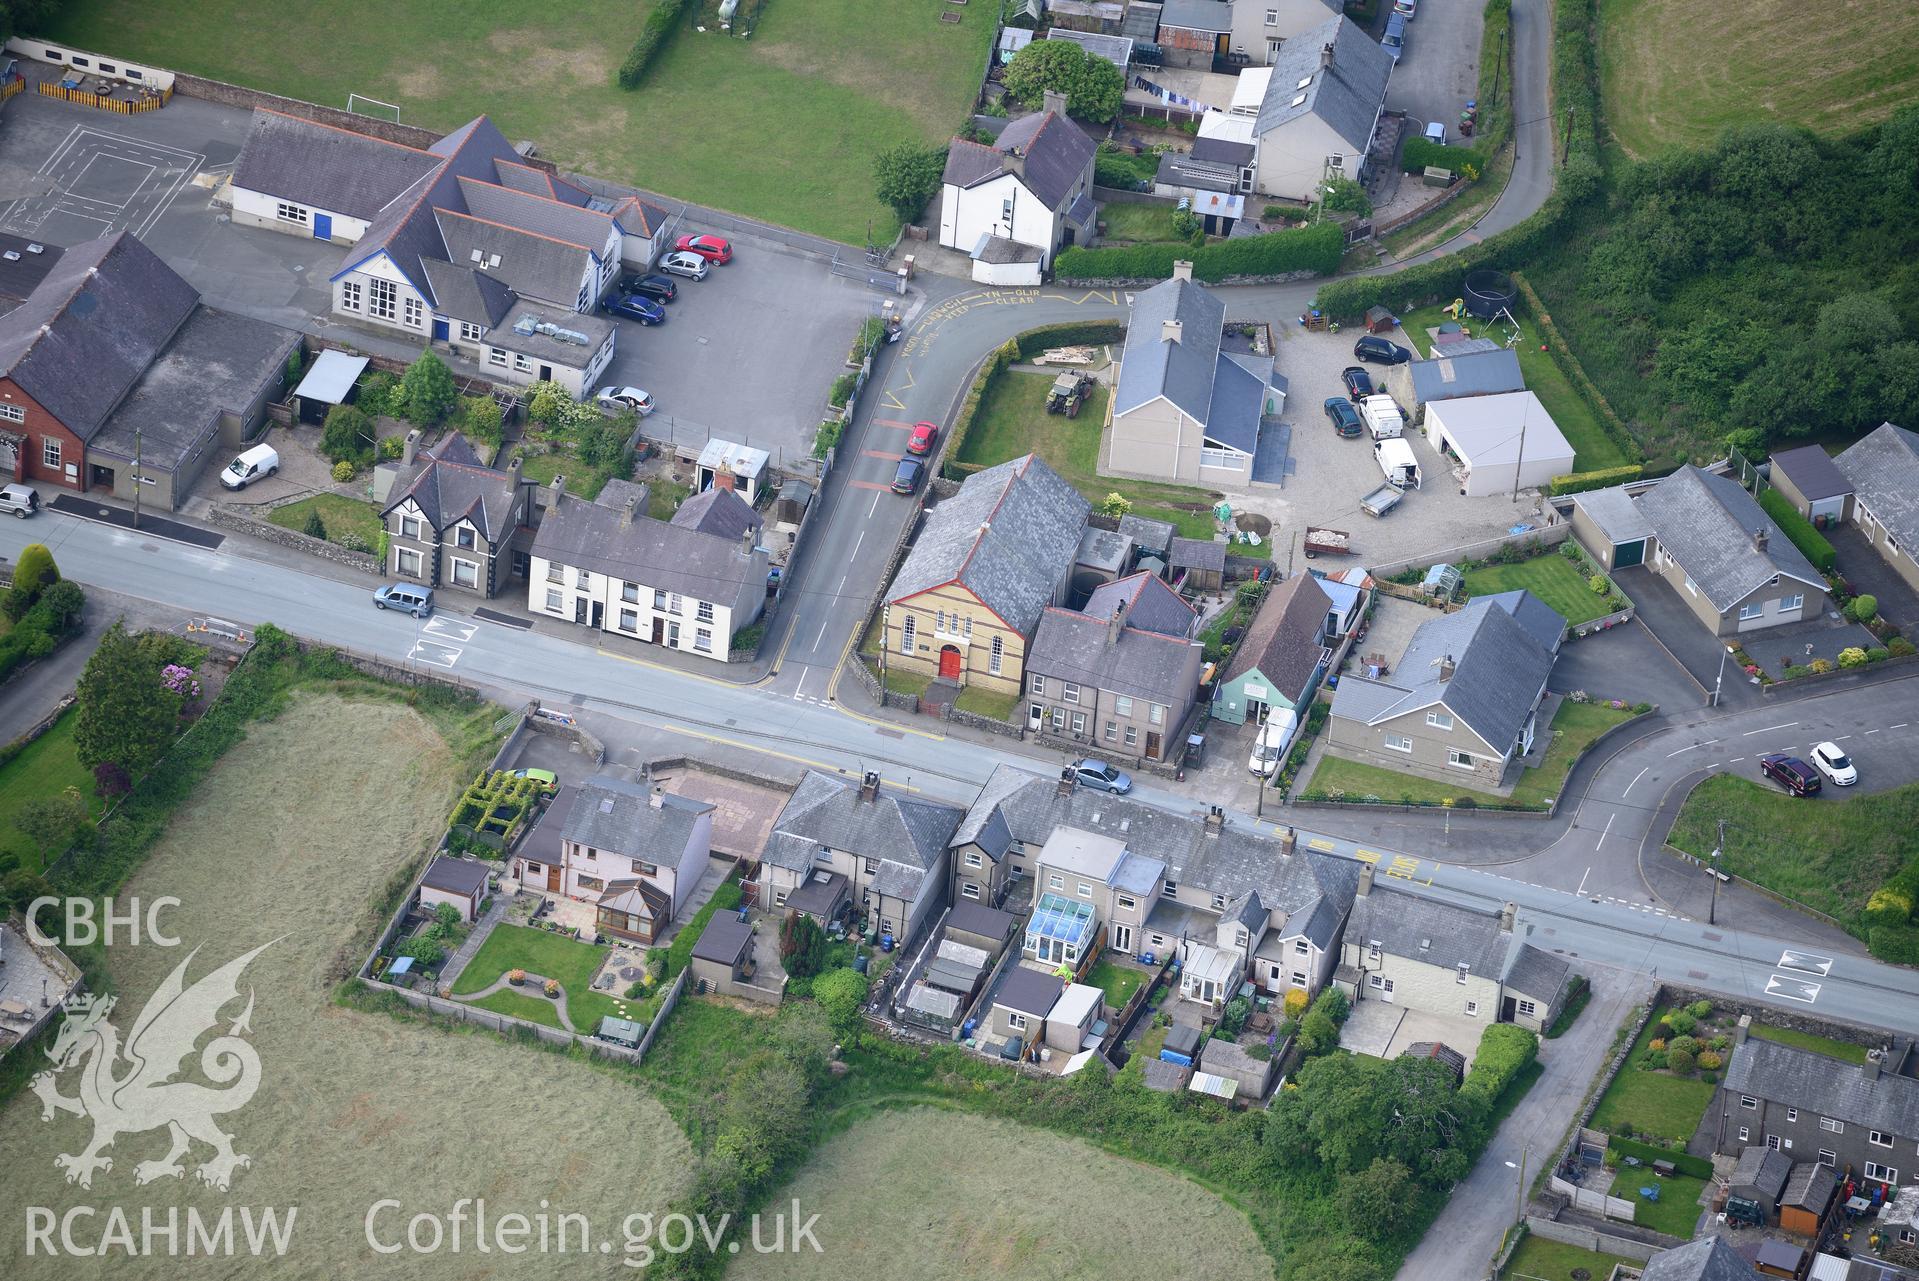 Ysgol Gynradd Chwilog and Capel Uchaf Calvinistic Methodist chapel in Chwilog, near Pwllheli. Oblique aerial photograph taken during the Royal Commission's programme of archaeological aerial reconnaissance by Toby Driver on 23rd June 2015.